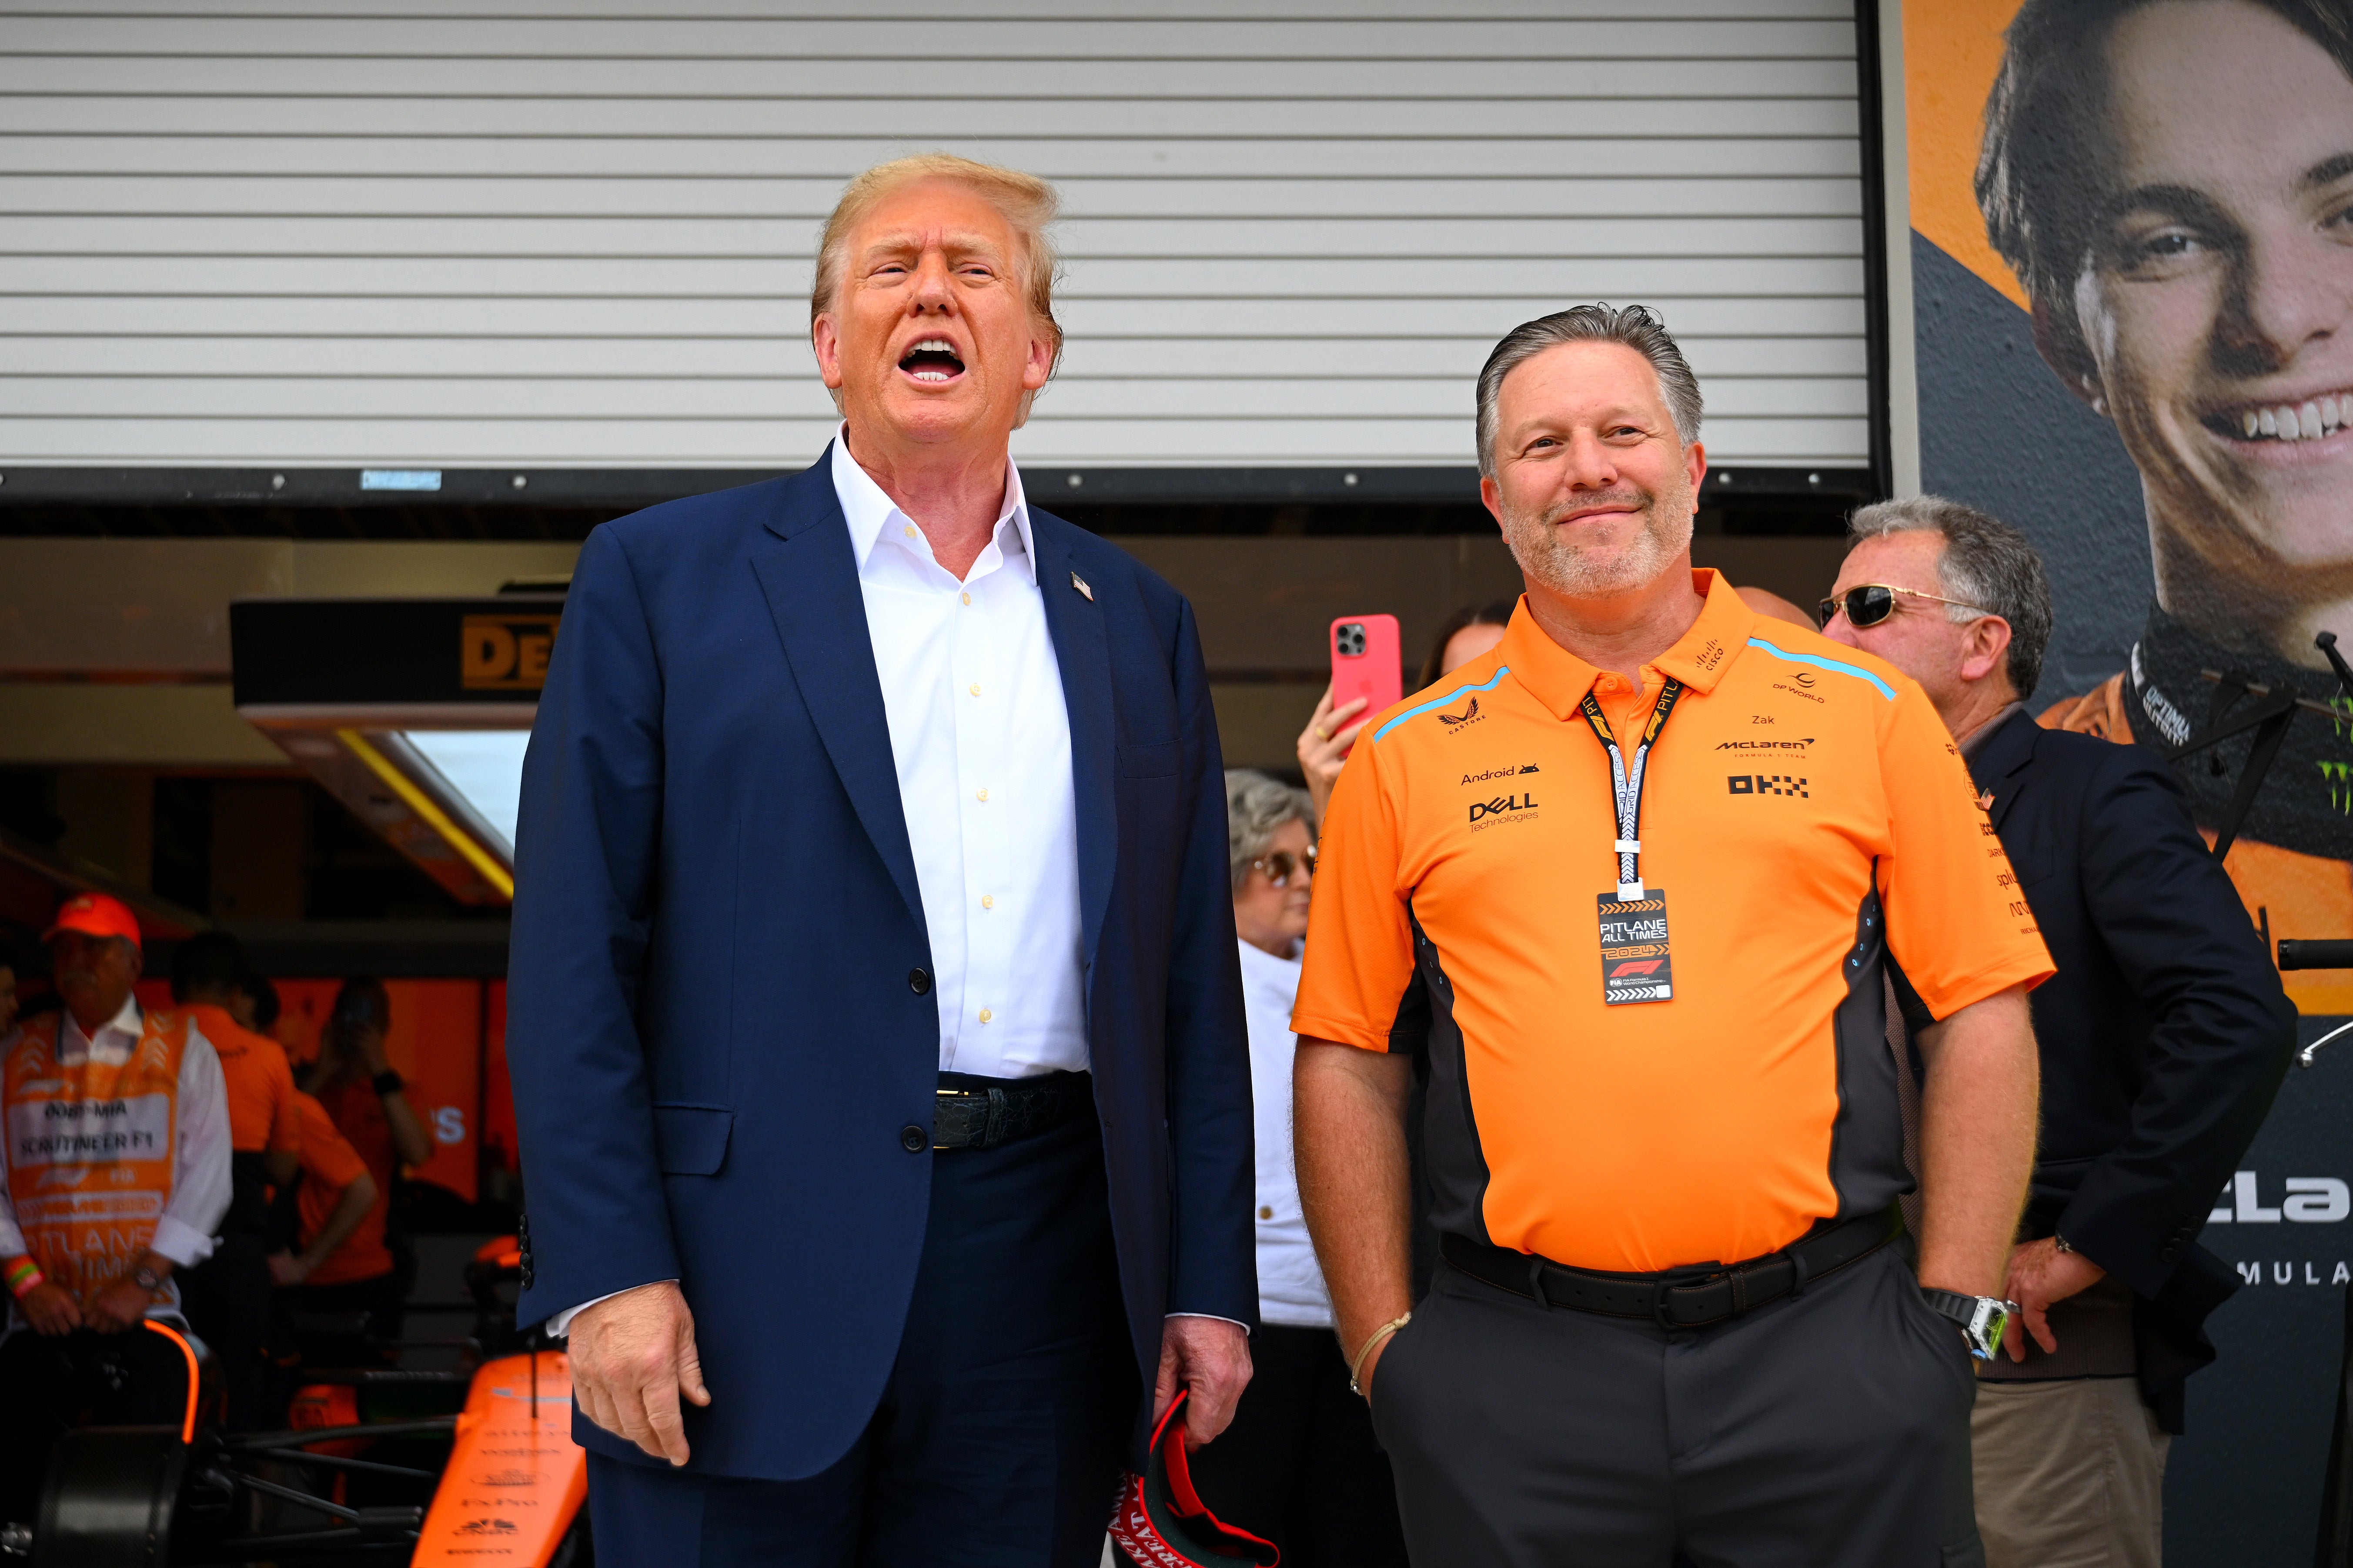 Trump was given a tour of the McLaren garage by CEO Zak Brown